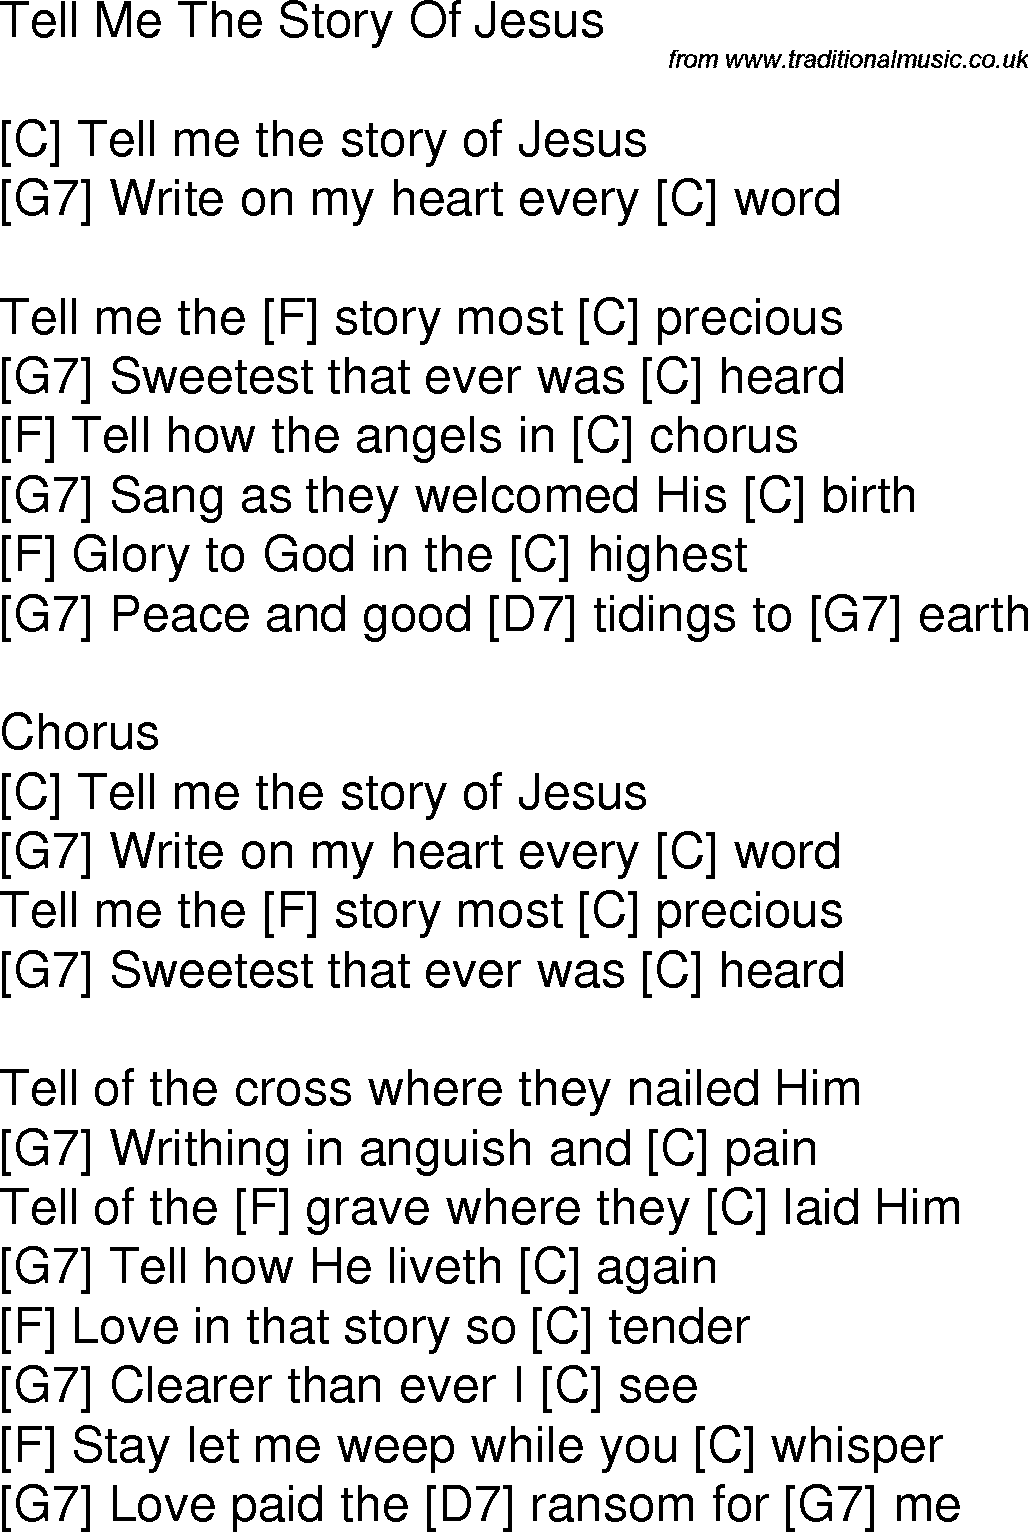 Old time song lyrics with chords for Tell Me The Story Of Jesus C